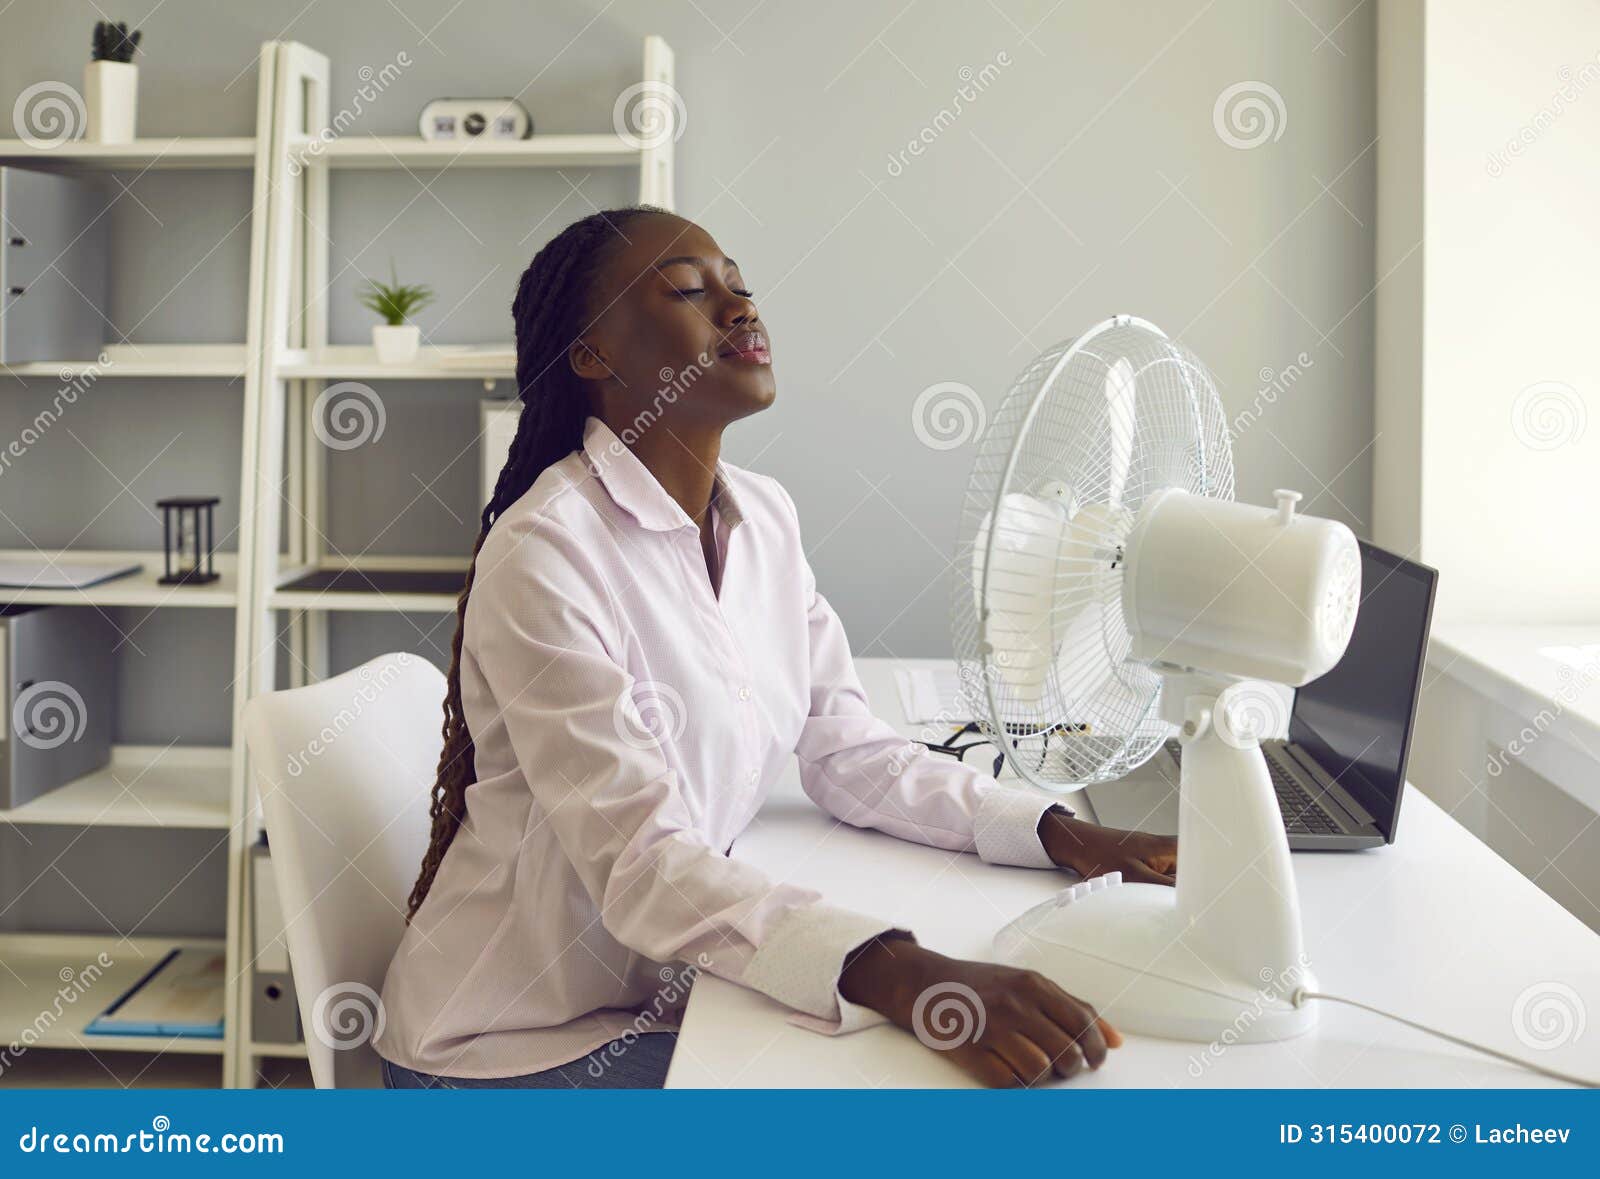 young african american woman working at office using electric fan during heatwave in office.